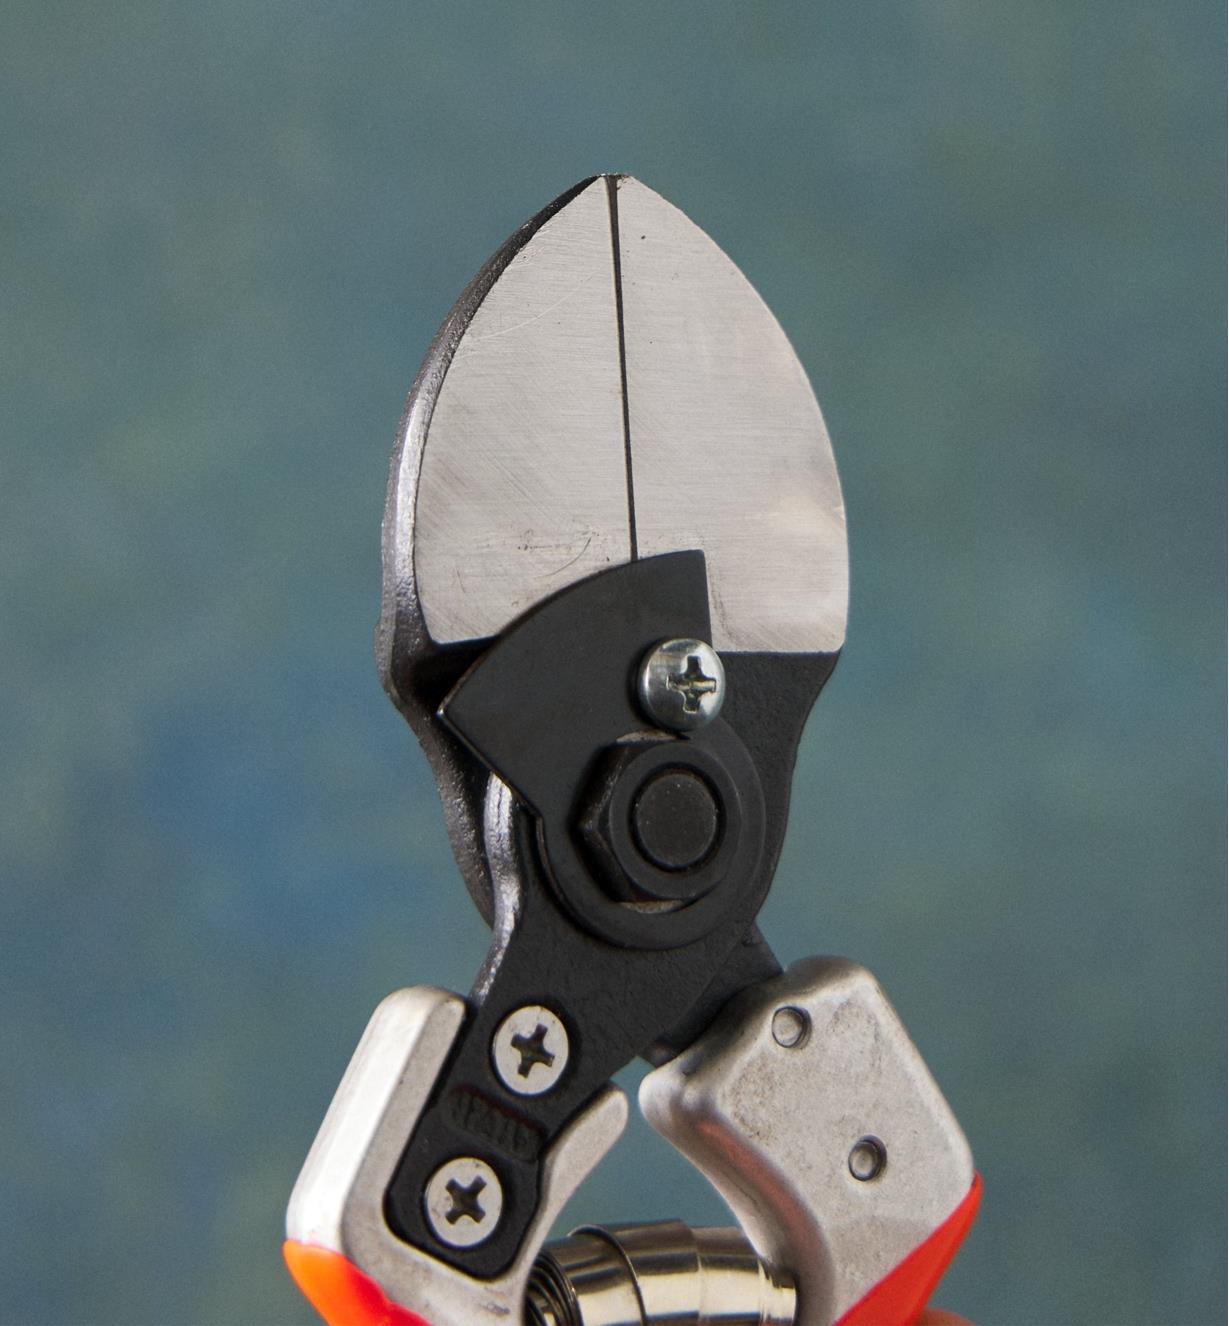 Closed blades and metal plate of the Castellari double-bladed pruner